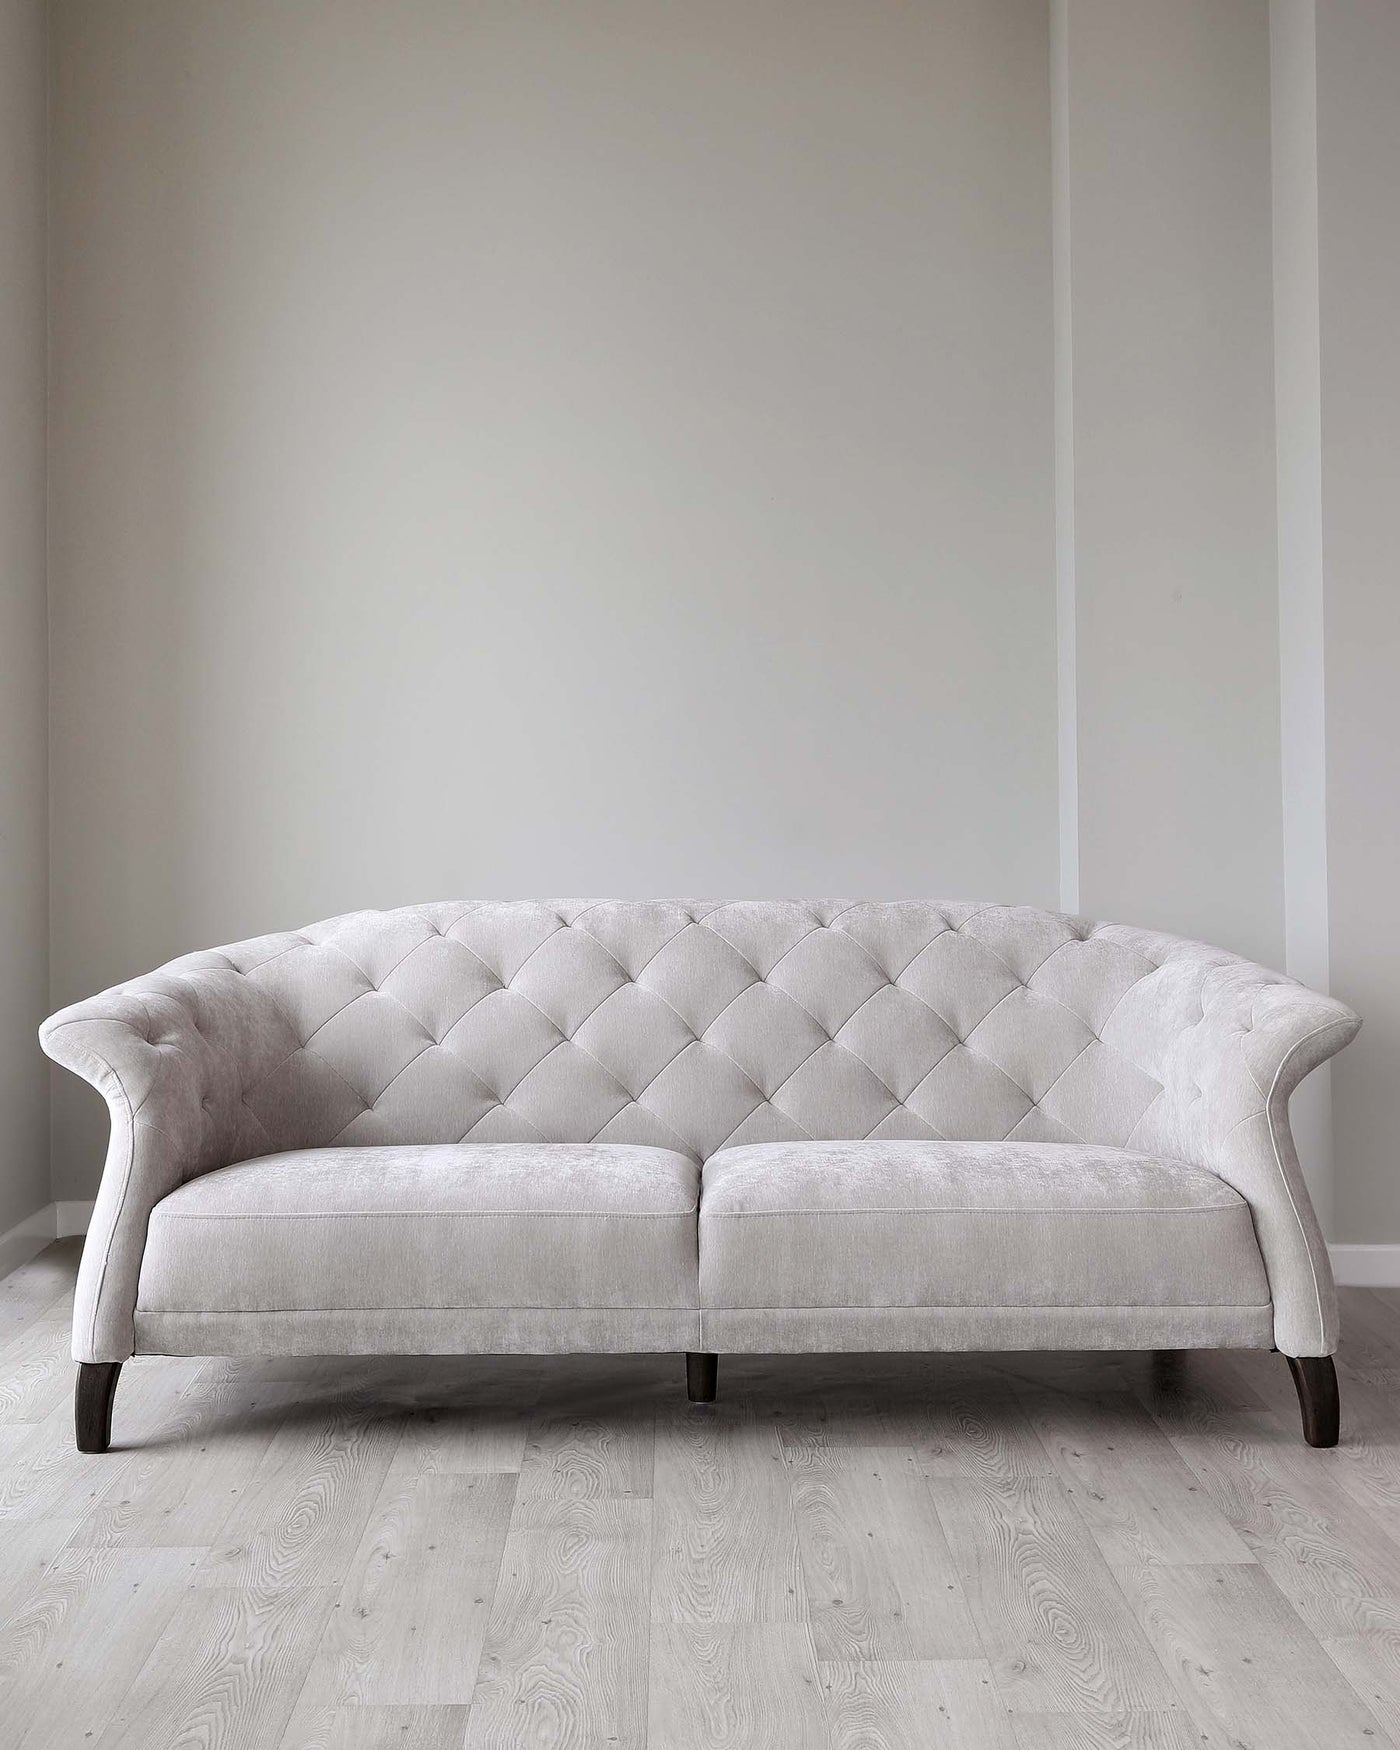 Elegant light beige Chesterfield sofa with tufted upholstery and rolled arms, featuring dark wooden legs, positioned on a light hardwood floor against a neutral wall.